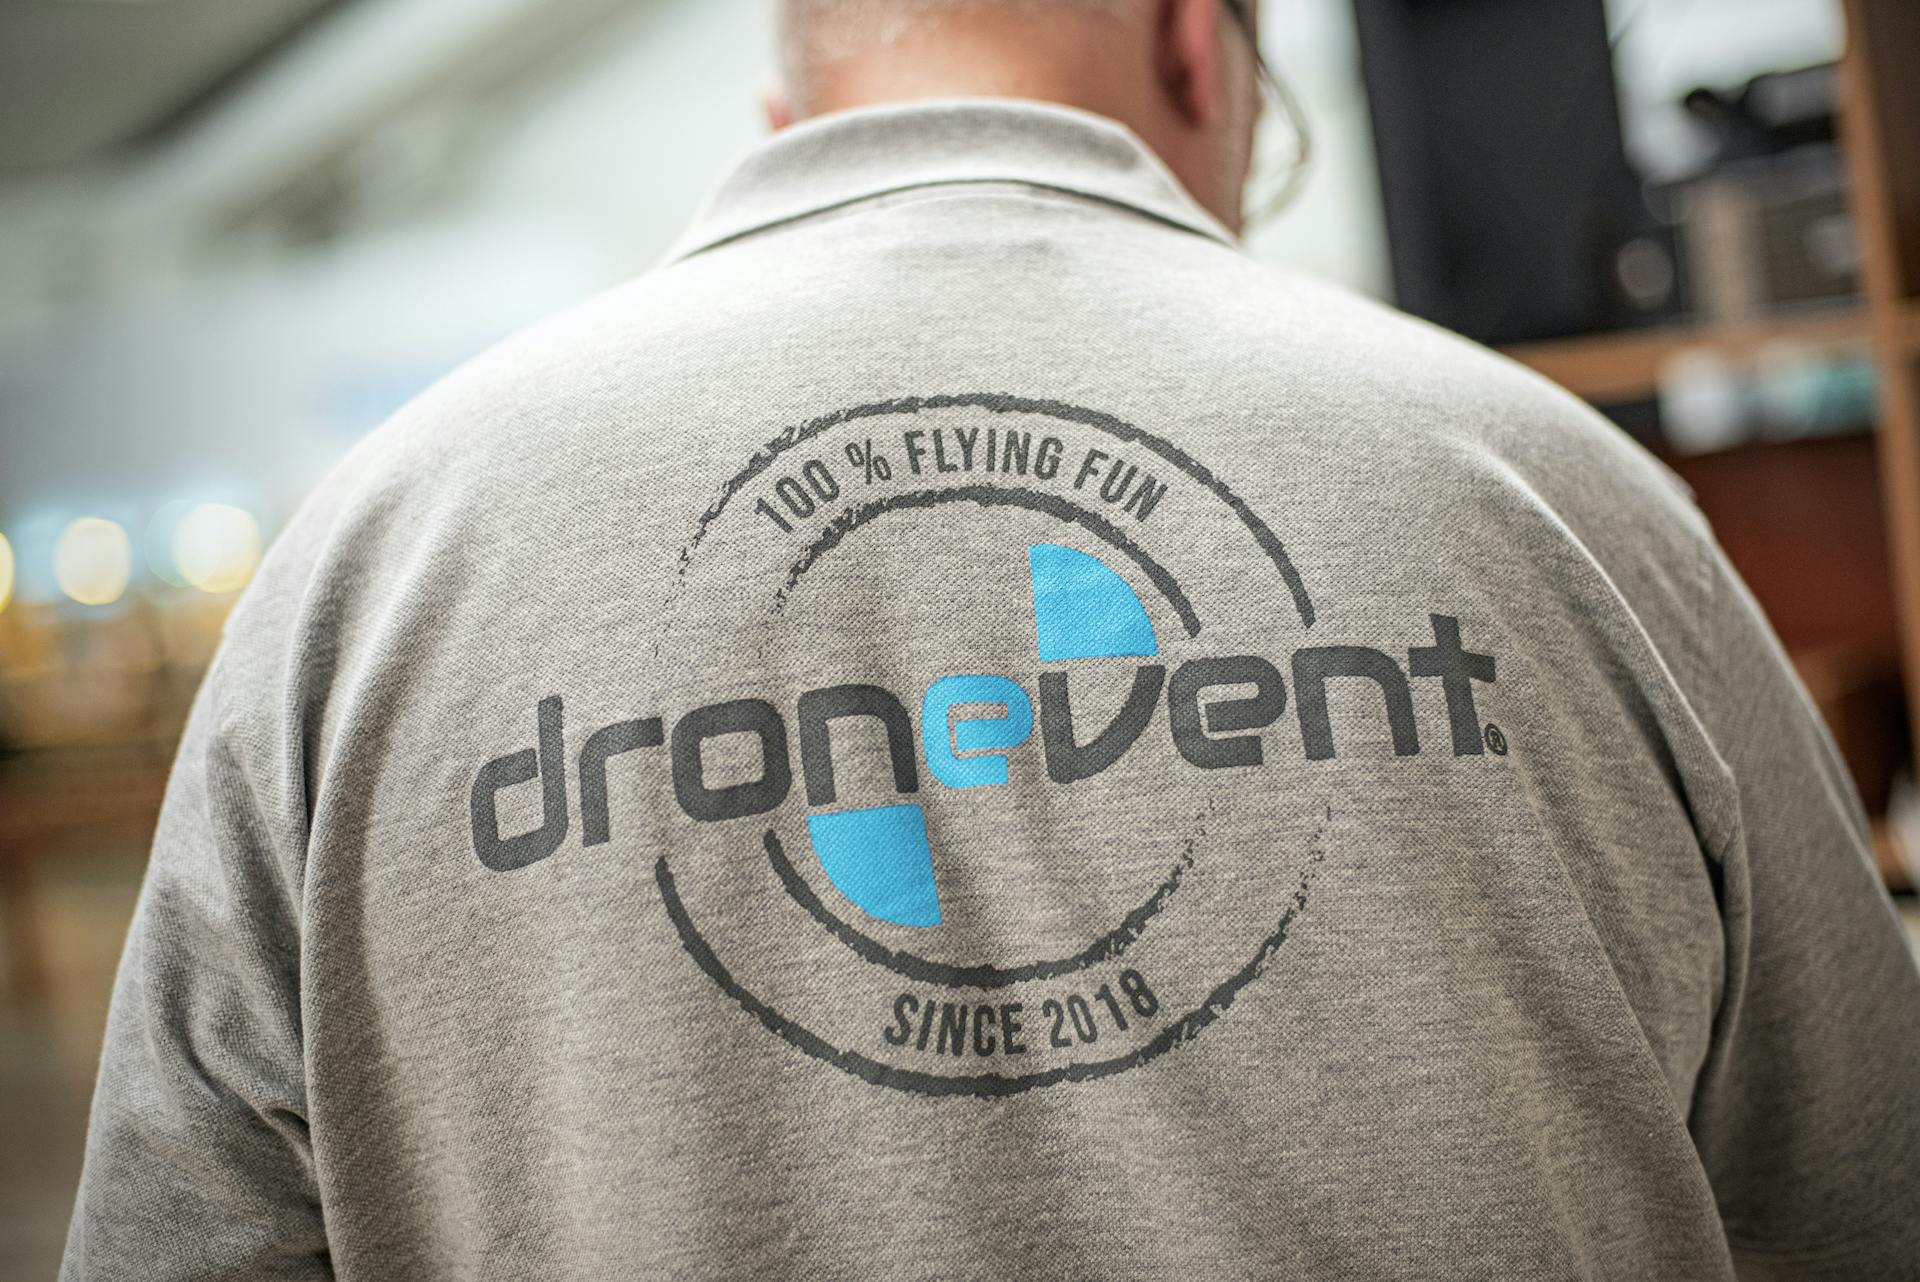 Hybrid Events by Dronevent